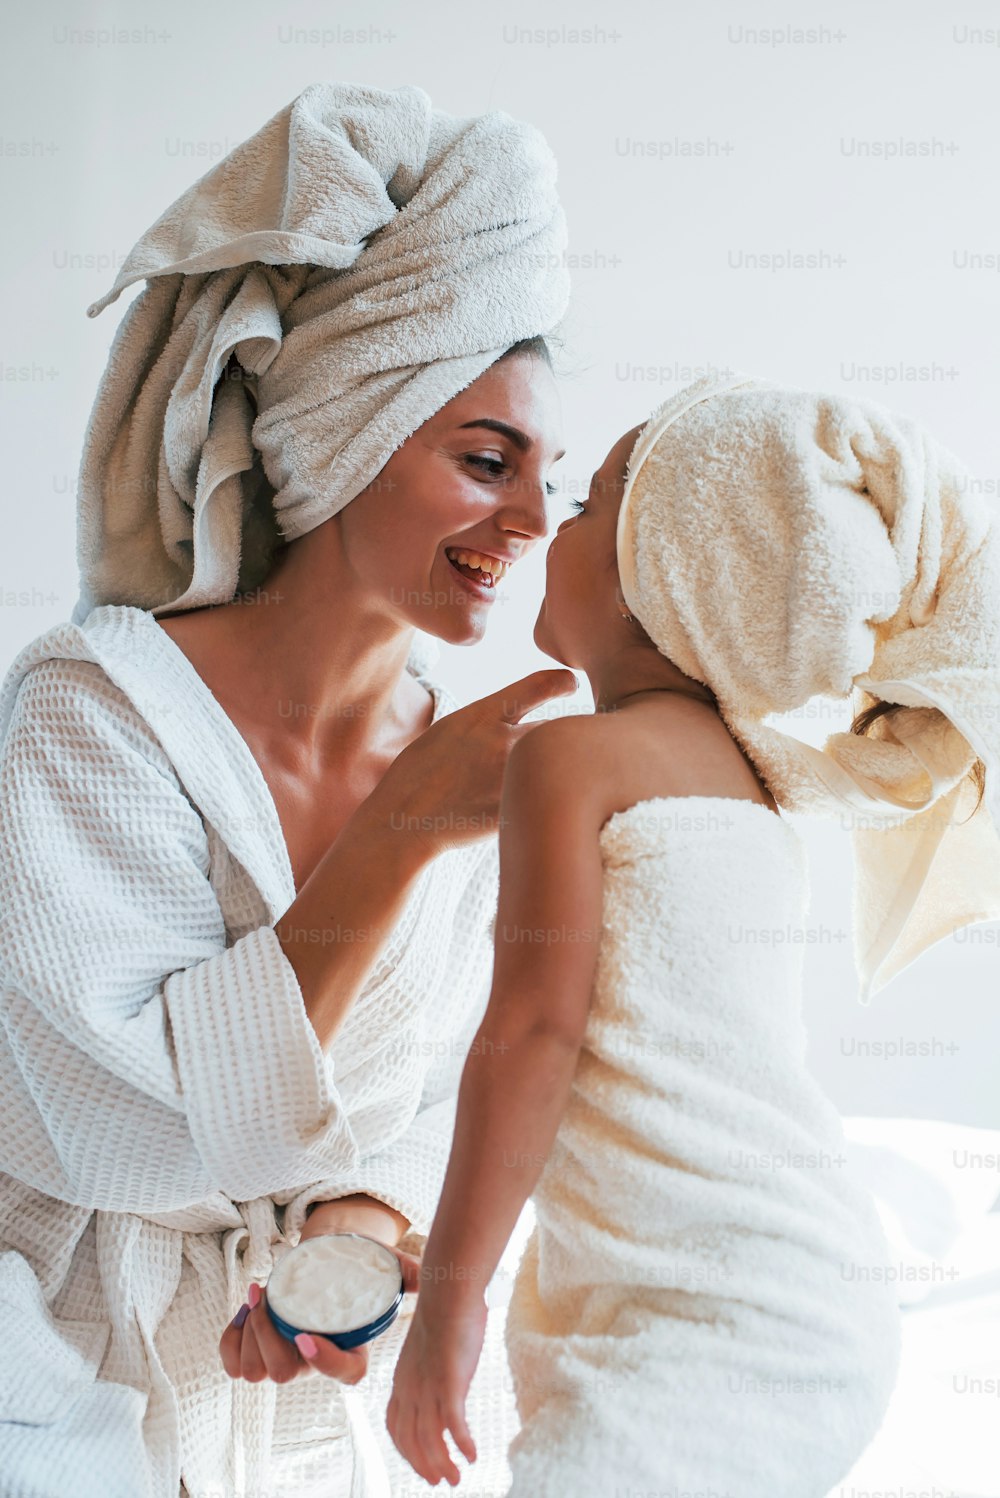 Using cream to clear skin. Young mother with her daugher have beauty day indoors in white room.